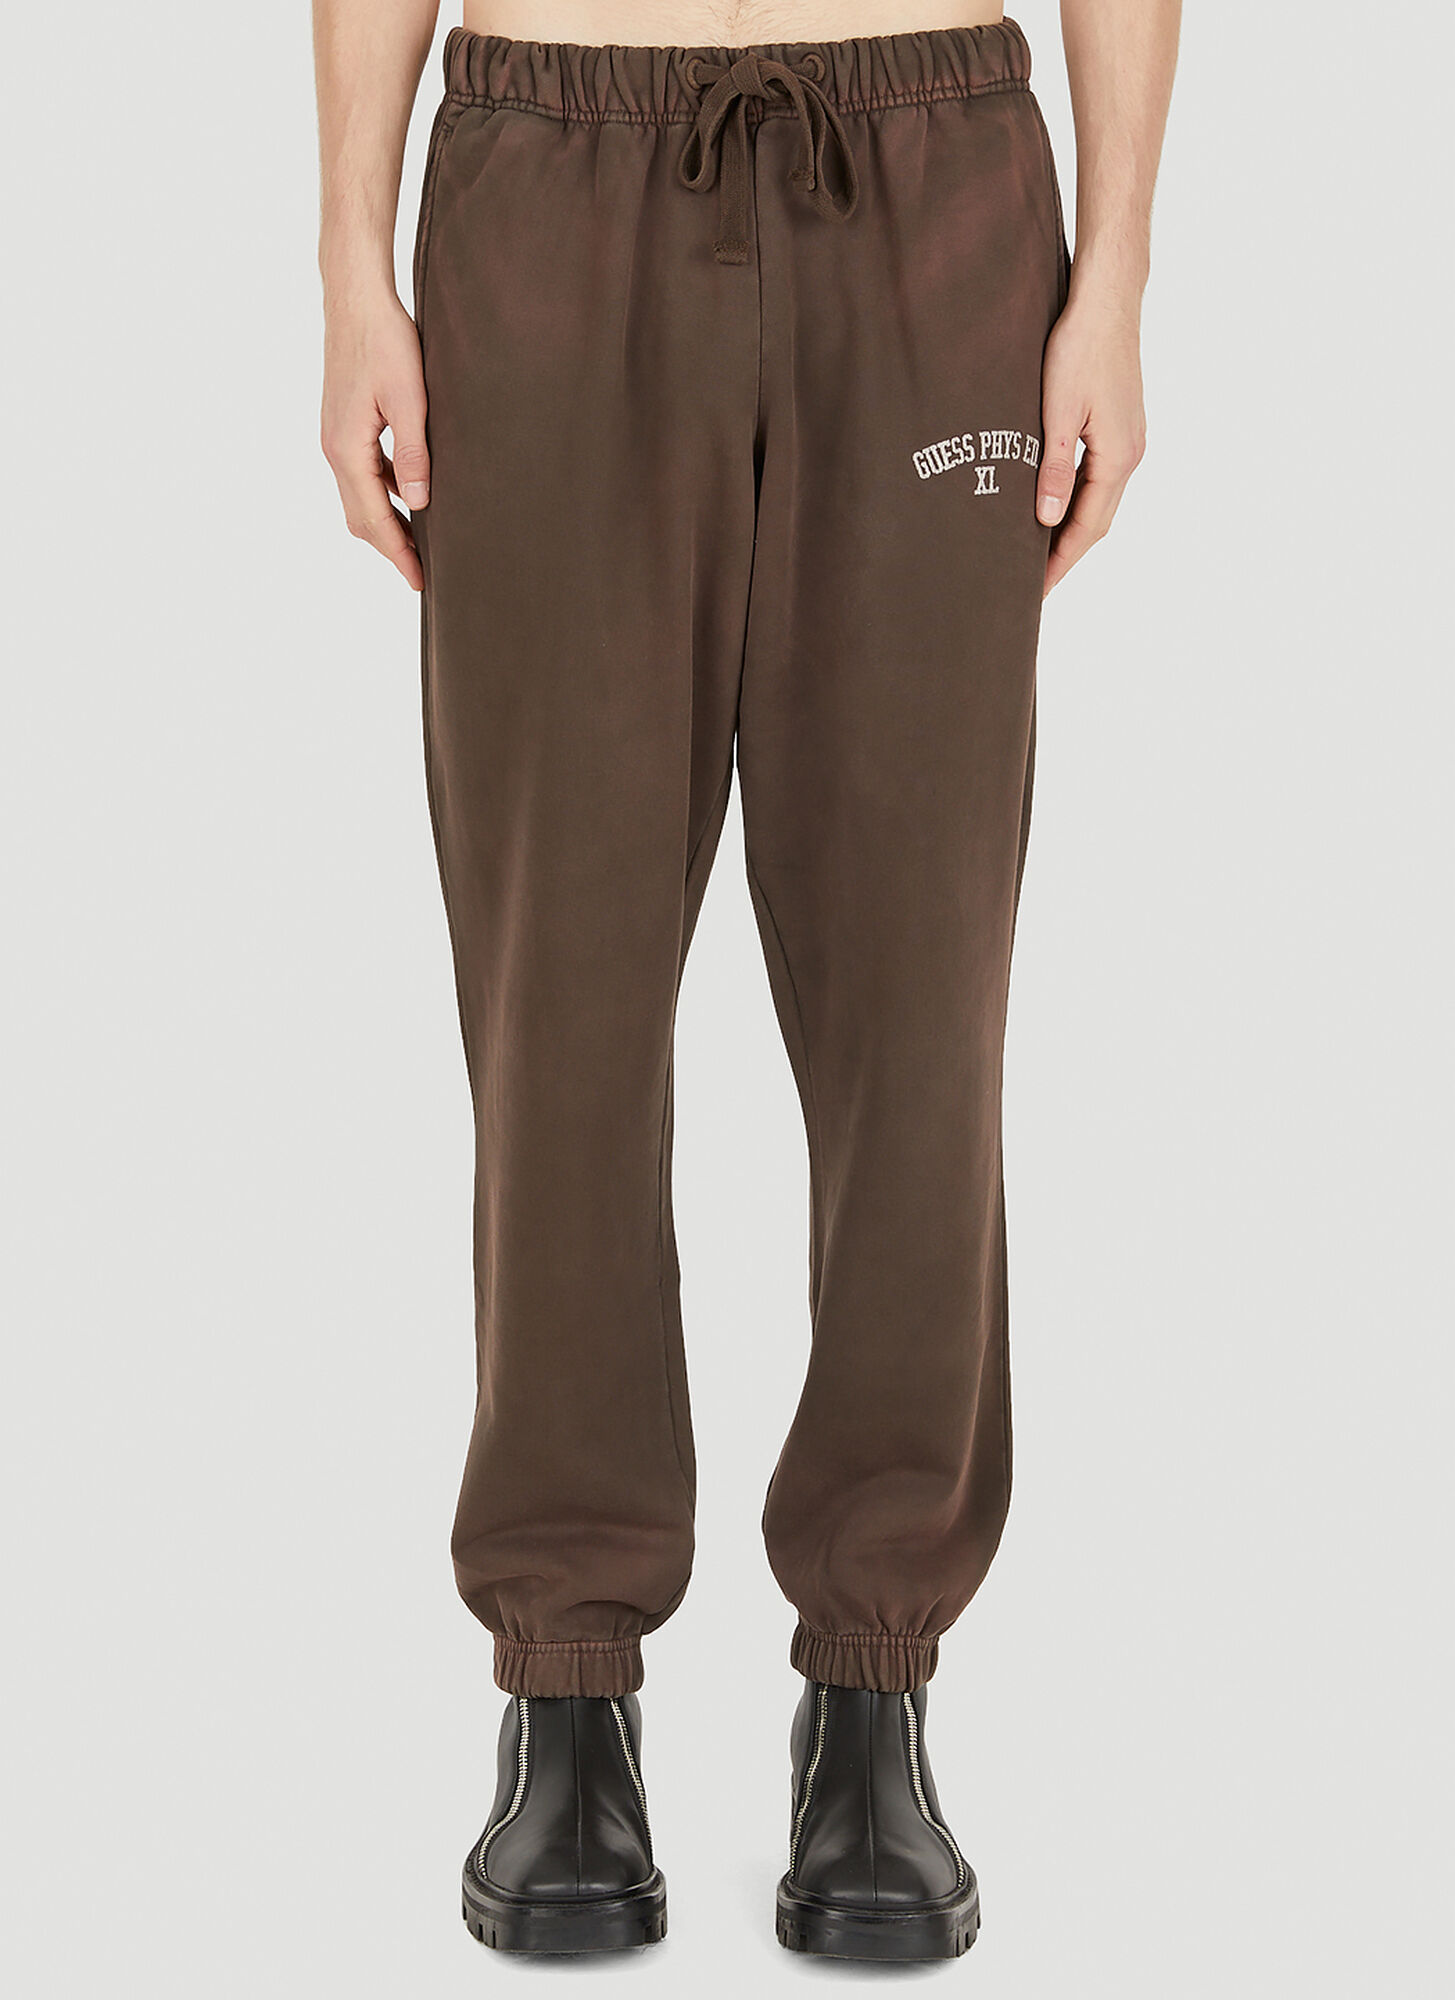 Guess Usa Embroidered Logo Track Pants Male Brown